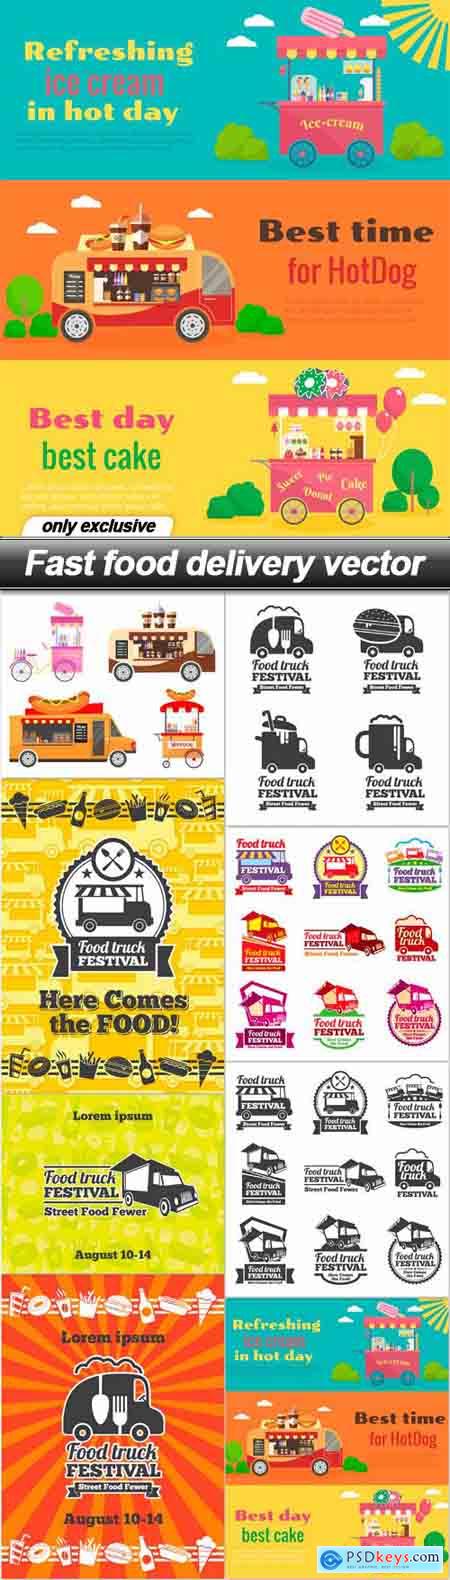 Fast food delivery vector - 8 EPS